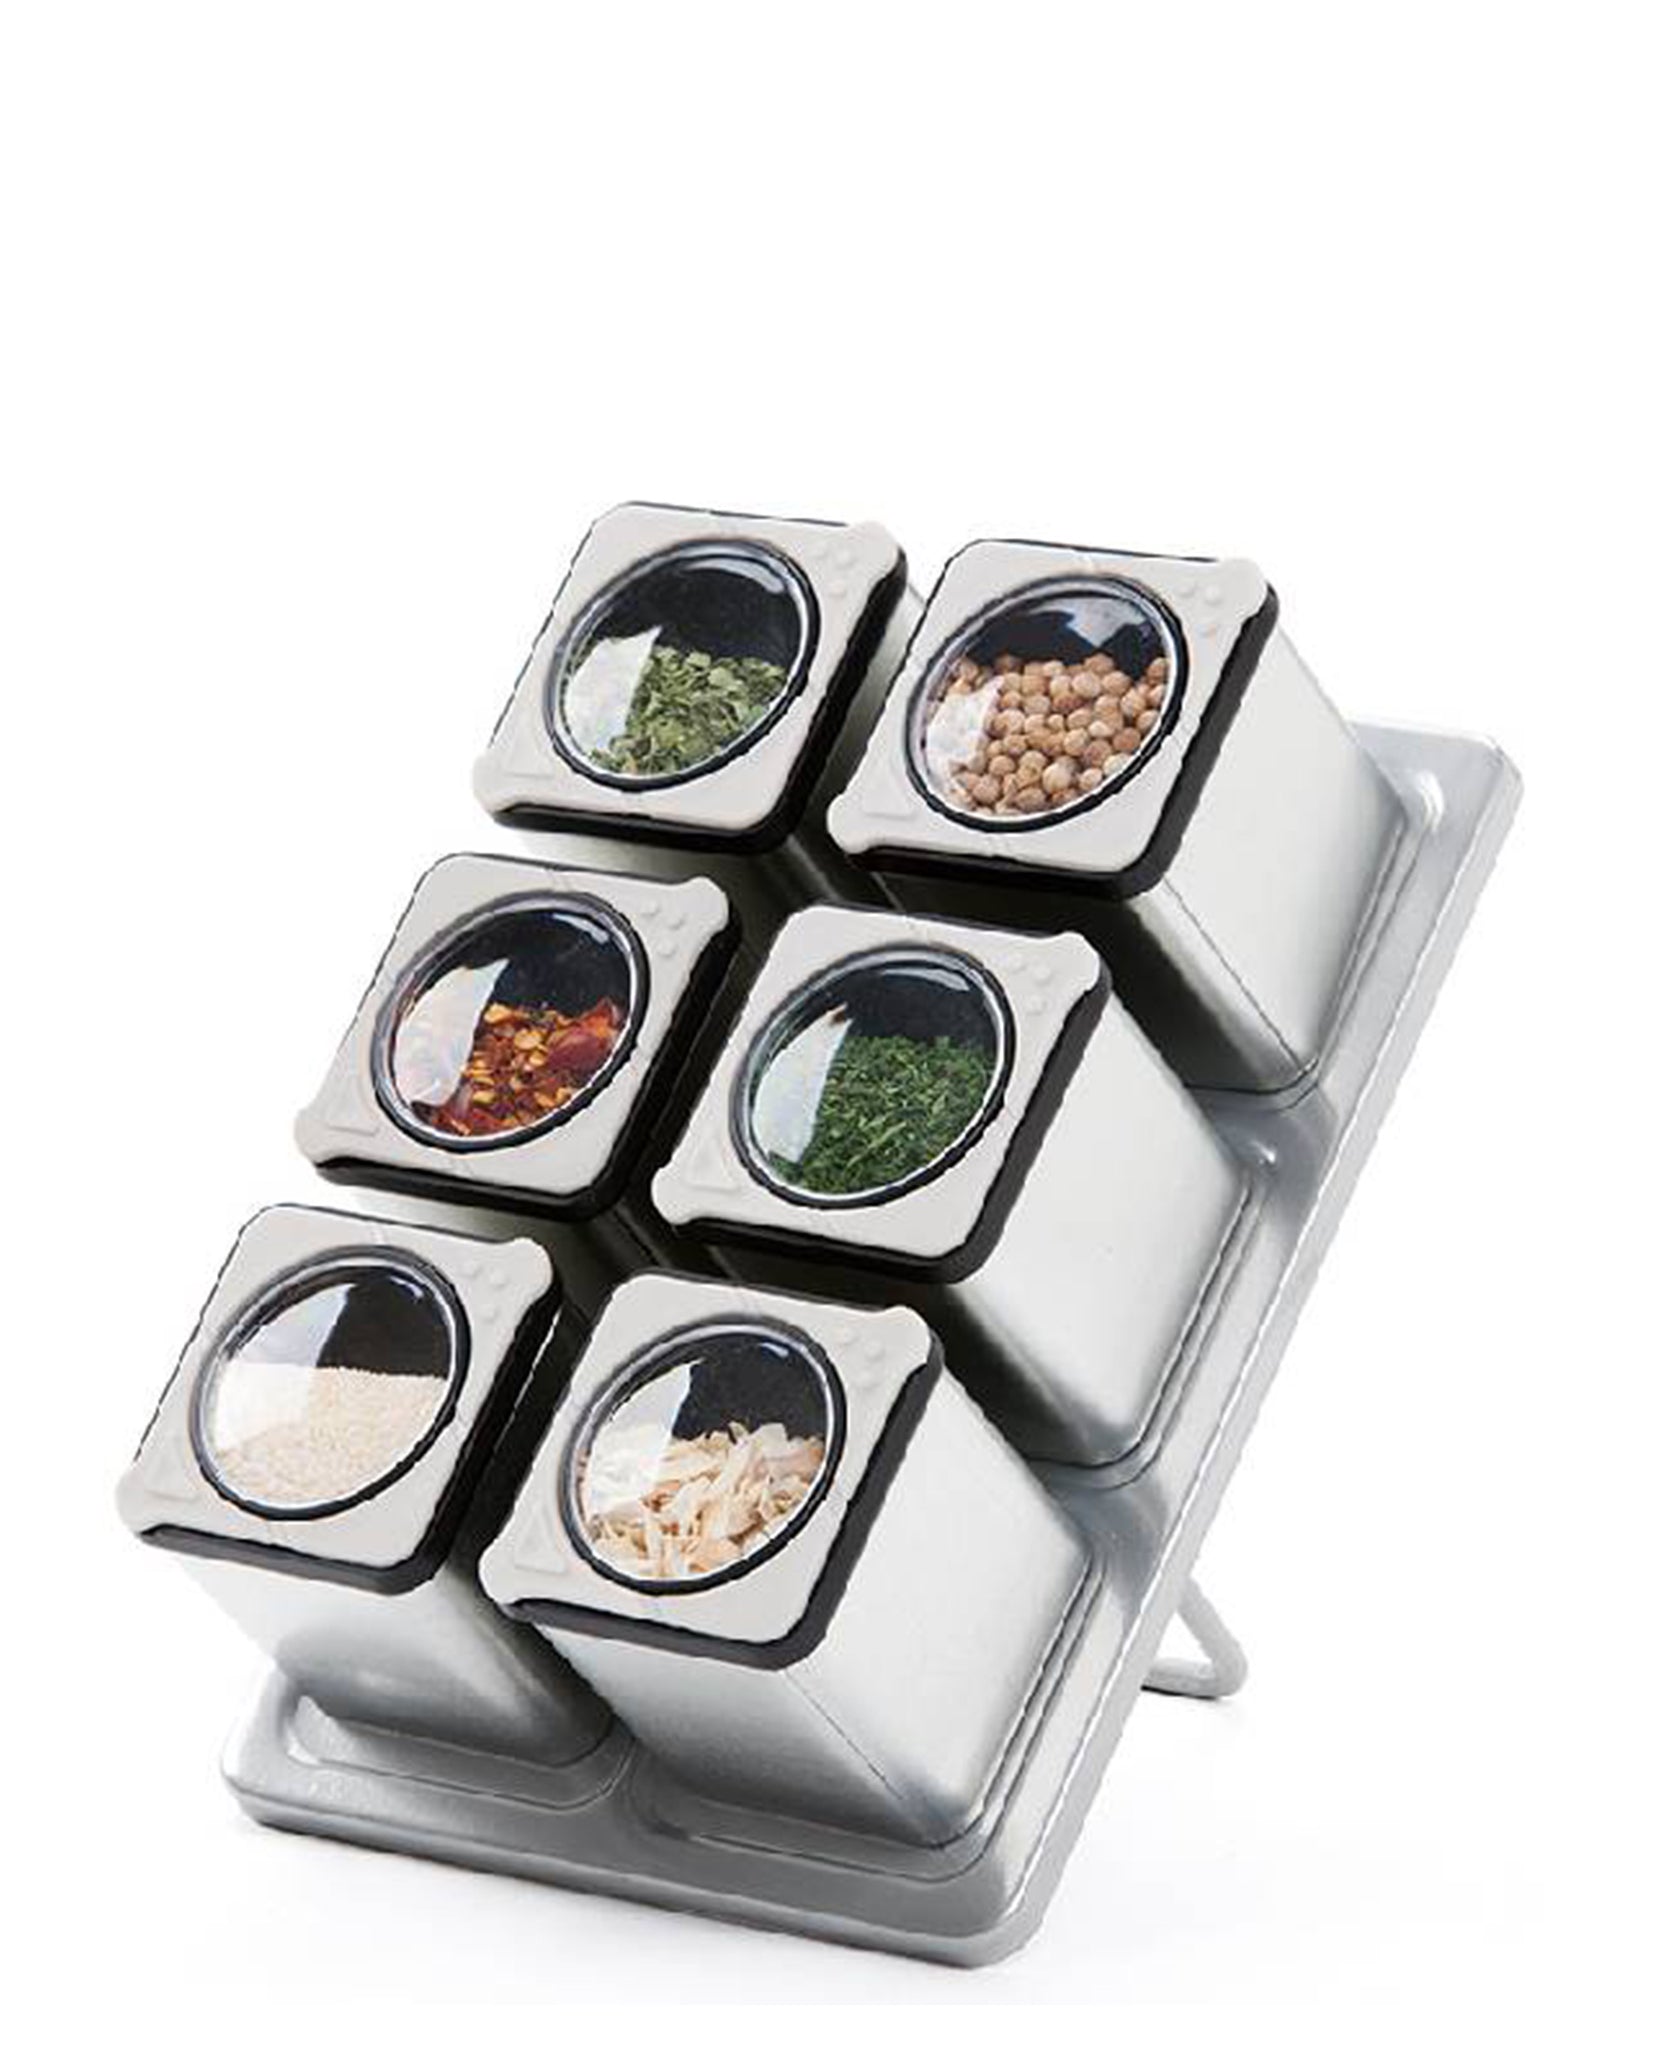 Aqua 6 Piece Spice Rack With Magnet 80ML - Silver